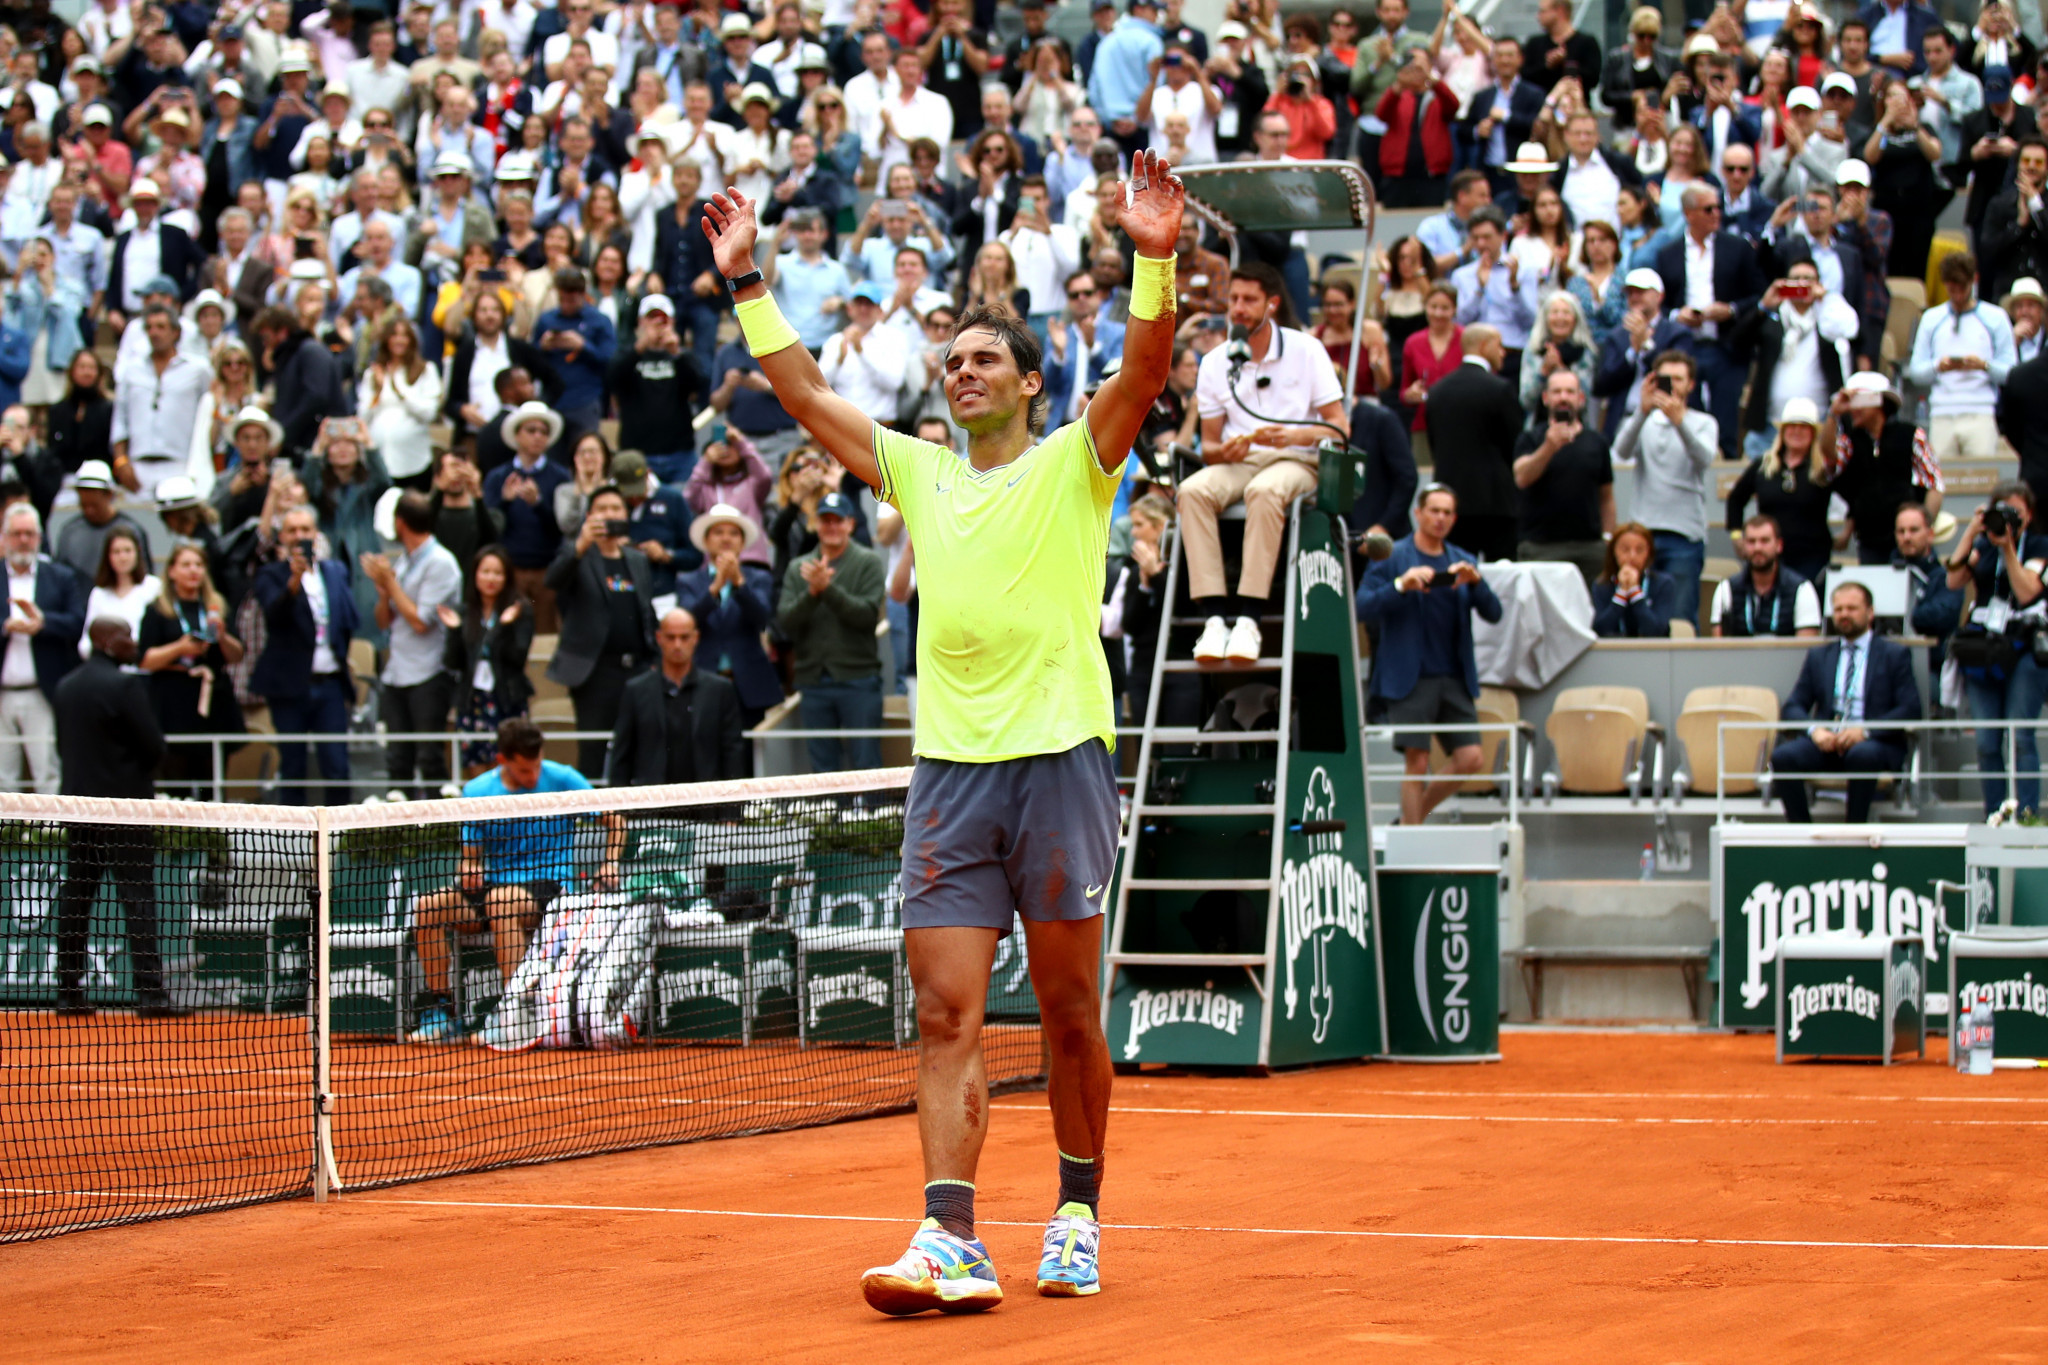 Nadal brings his A-game to wrap up 12th Roland Garros crown